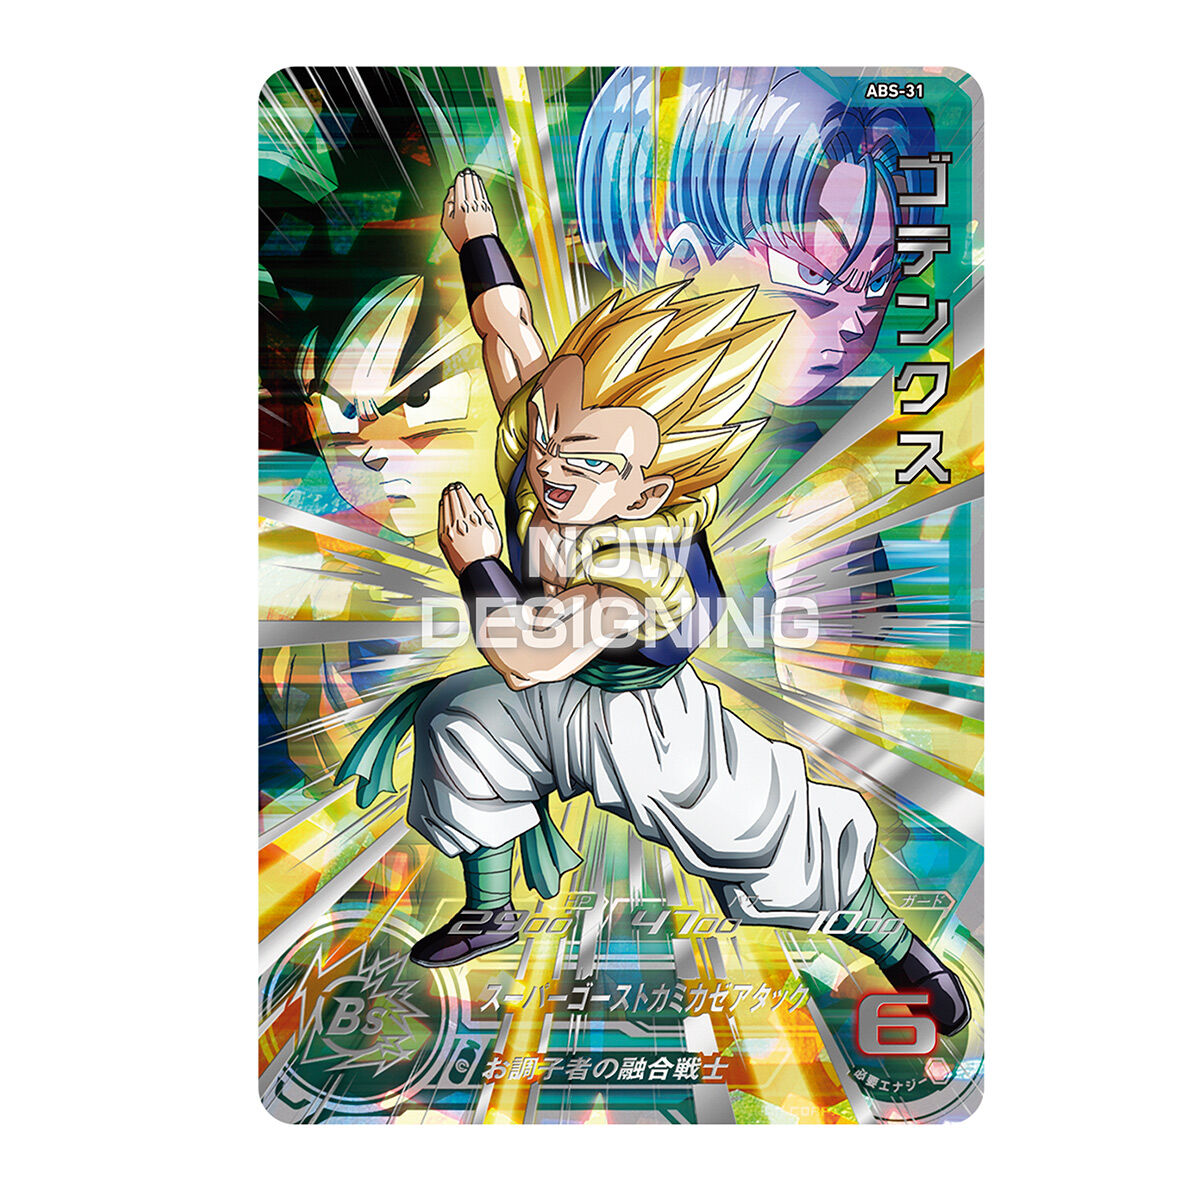 Super Dragon Ball Heros 13th ANNIVERSARY SPECIAL SET DRAMATIC COLLECTION BOX